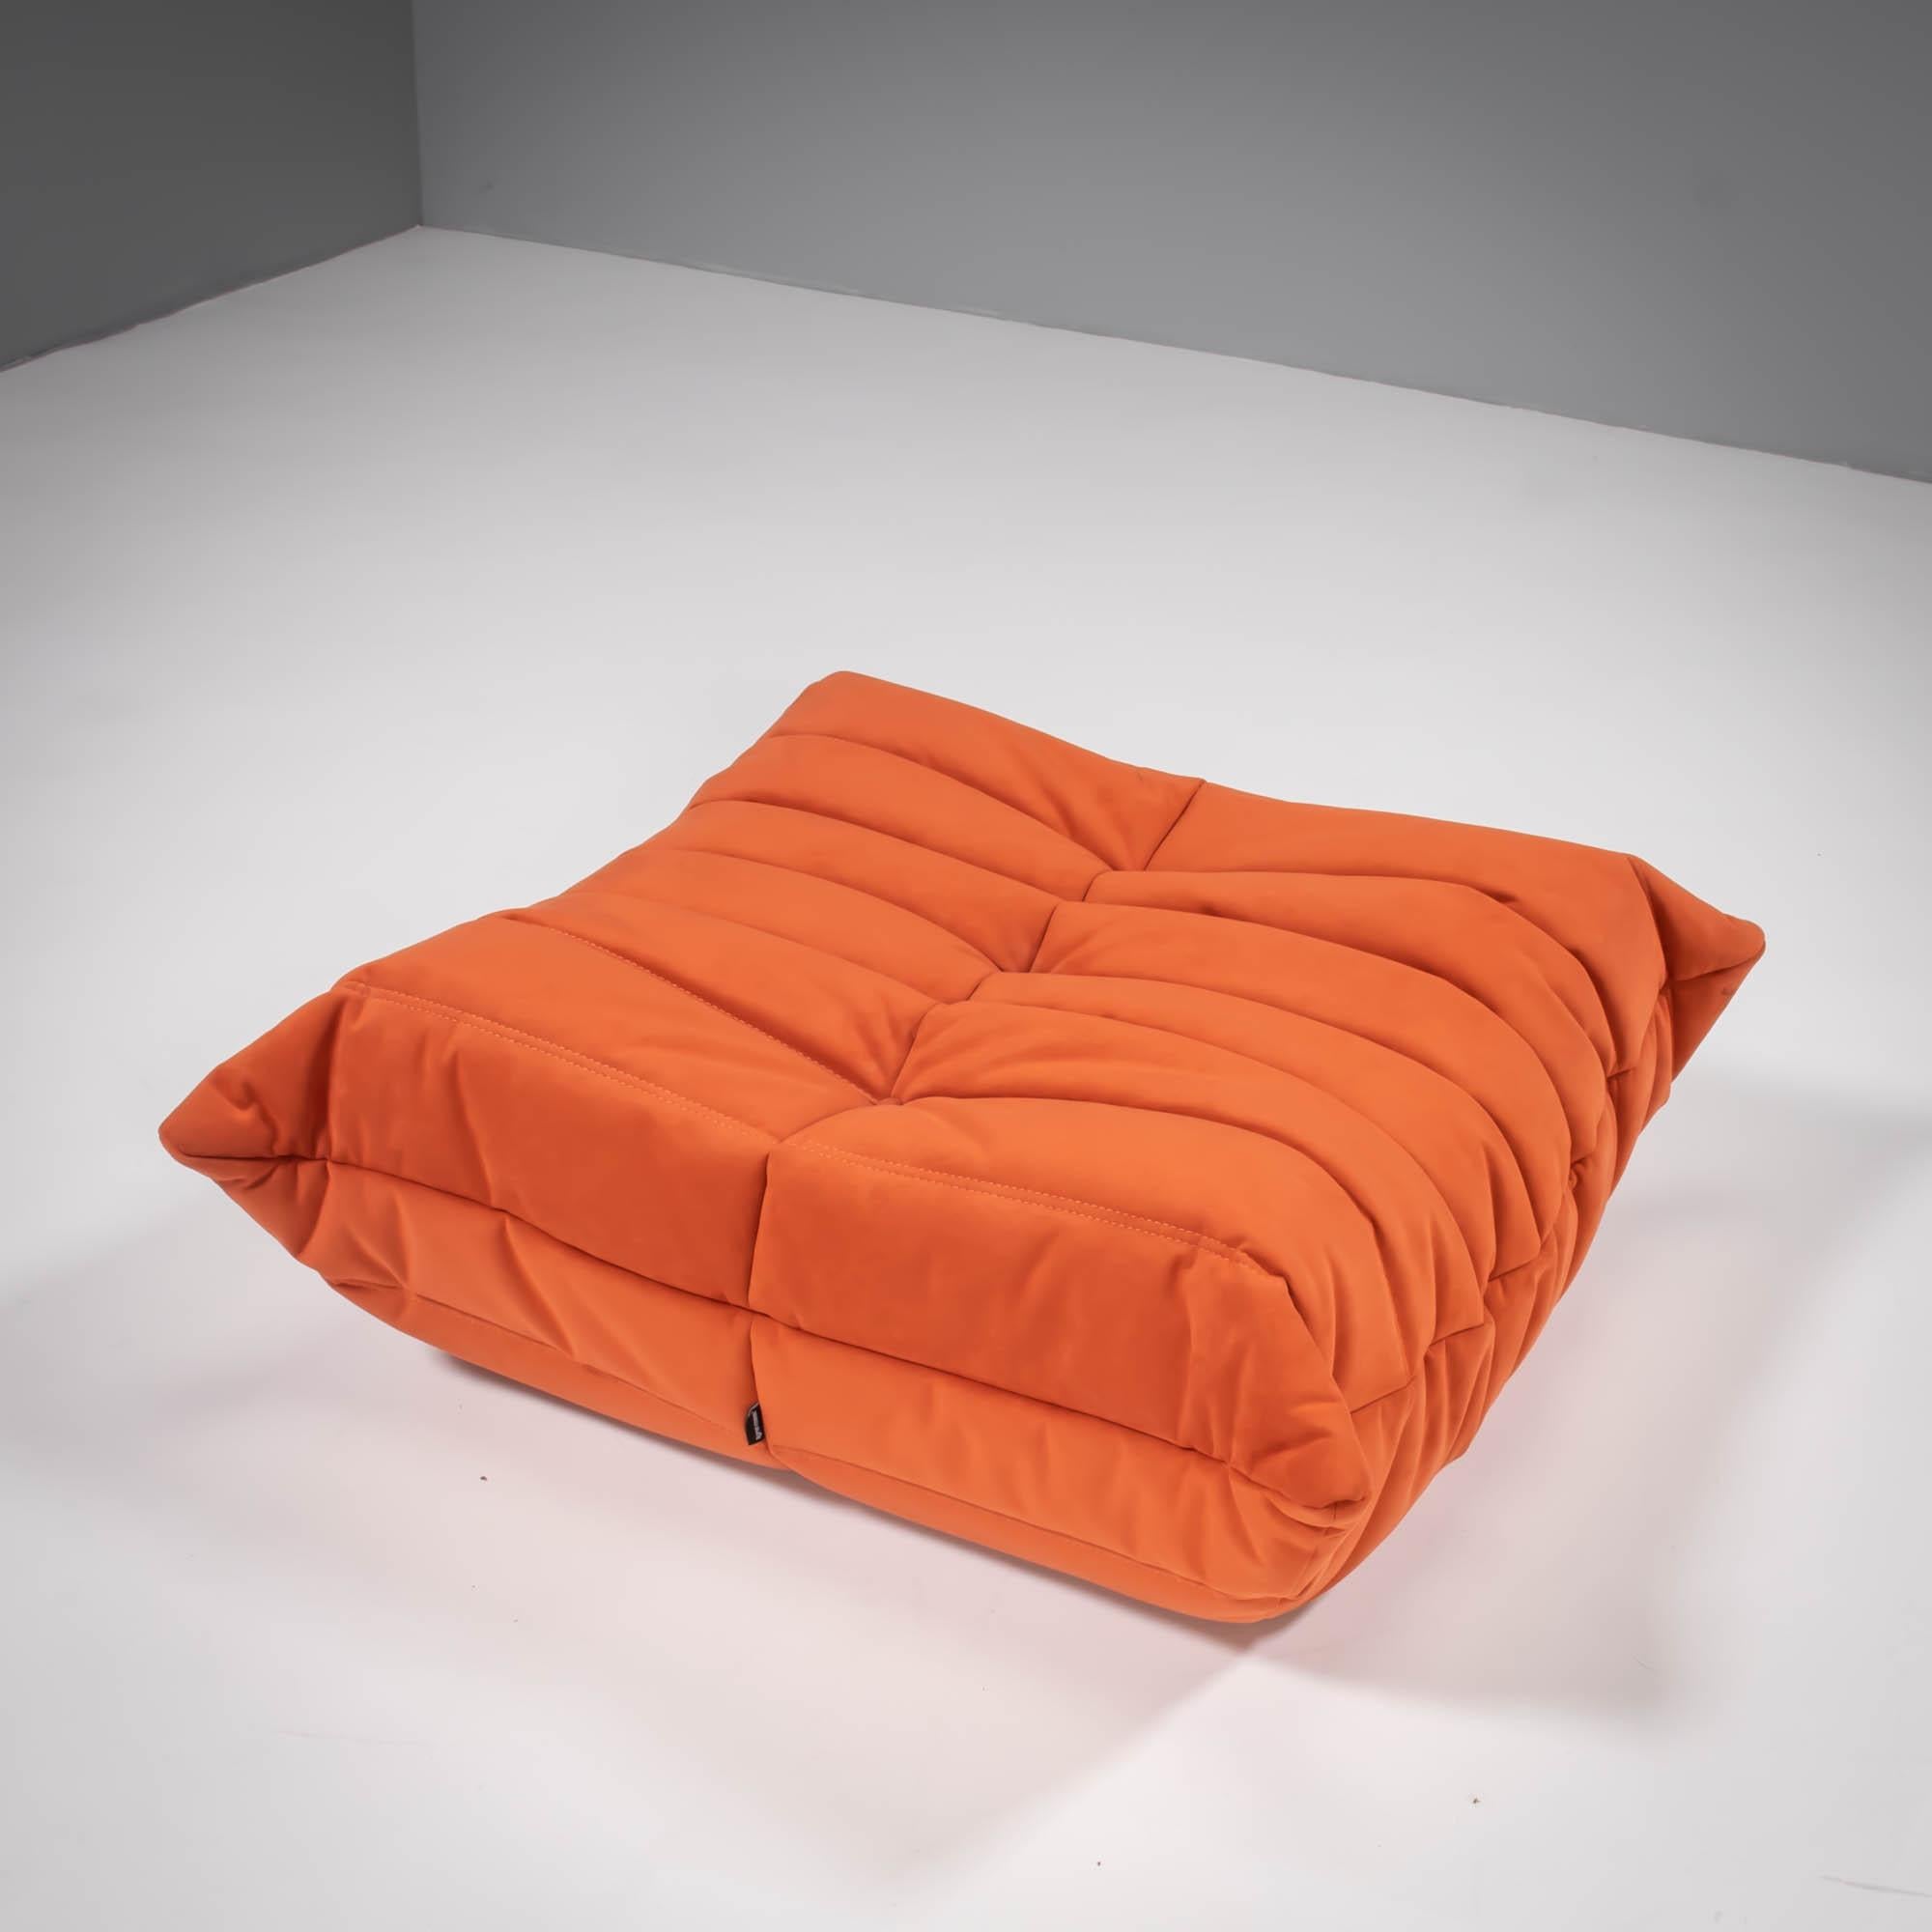 The iconic Togo sofa, originally designed by Michel Ducaroy for Ligne Roset in 1973 has become a design Classic.

The footstool features cadmium orange upholstery and the instantly recognizable pleated fabric design, which gives the sofa its relaxed